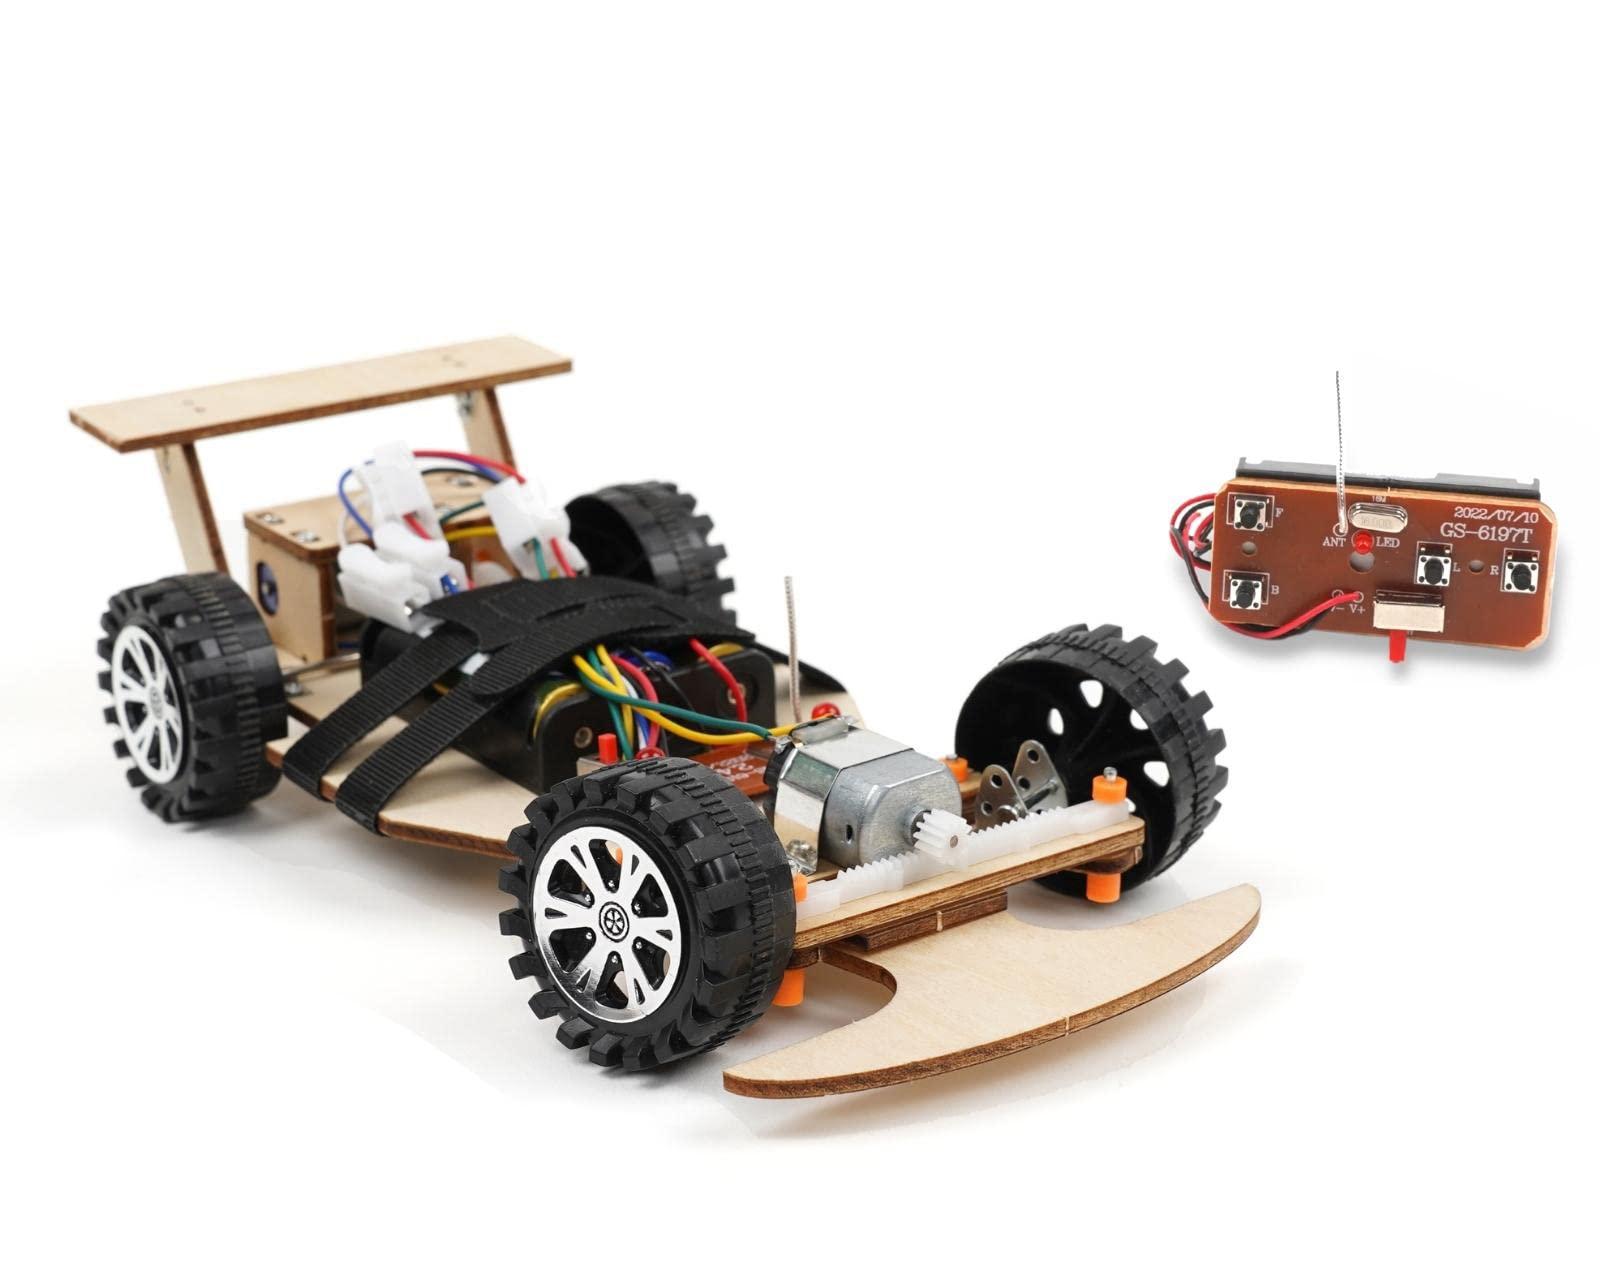 Radio Controlled Cars: Building and Customizing Options for RC Cars